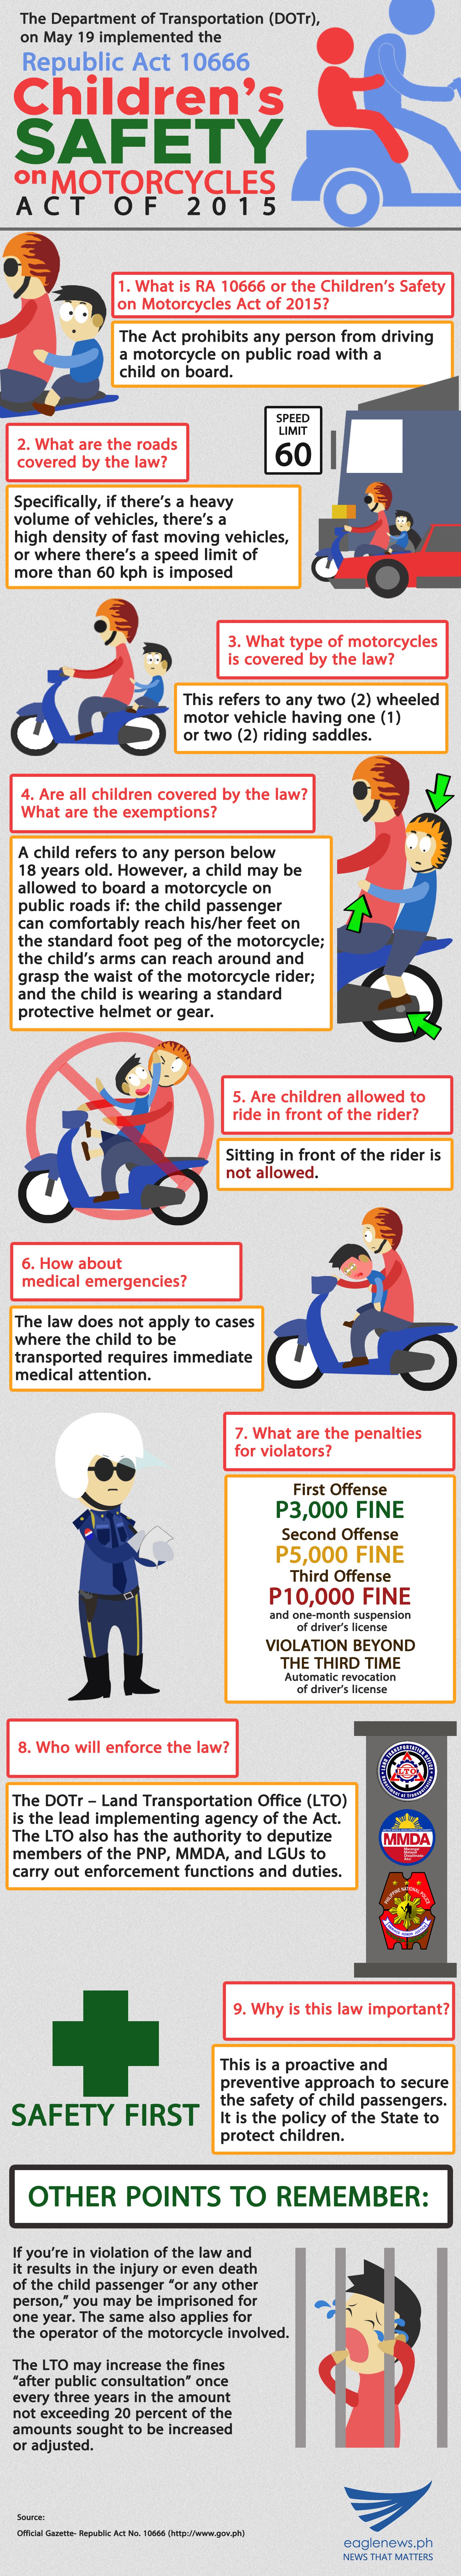 Children's Safety on Motorcycles Act of 2015